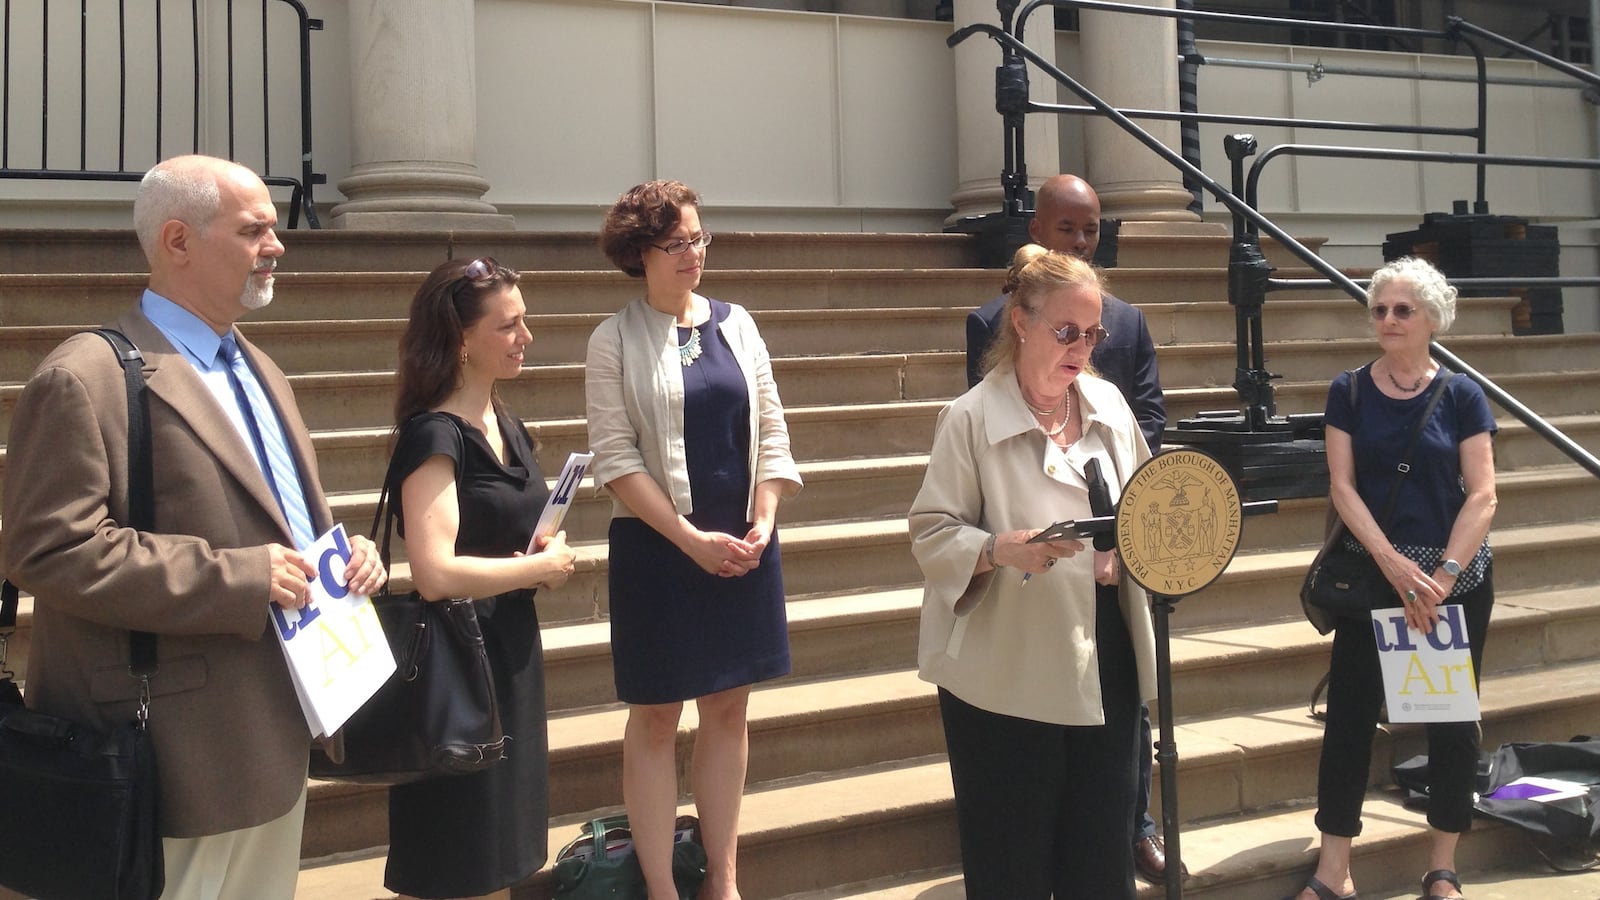 Manhattan Borough President Gale Brewer said some of the city's arts funding will go toward co-located schools.